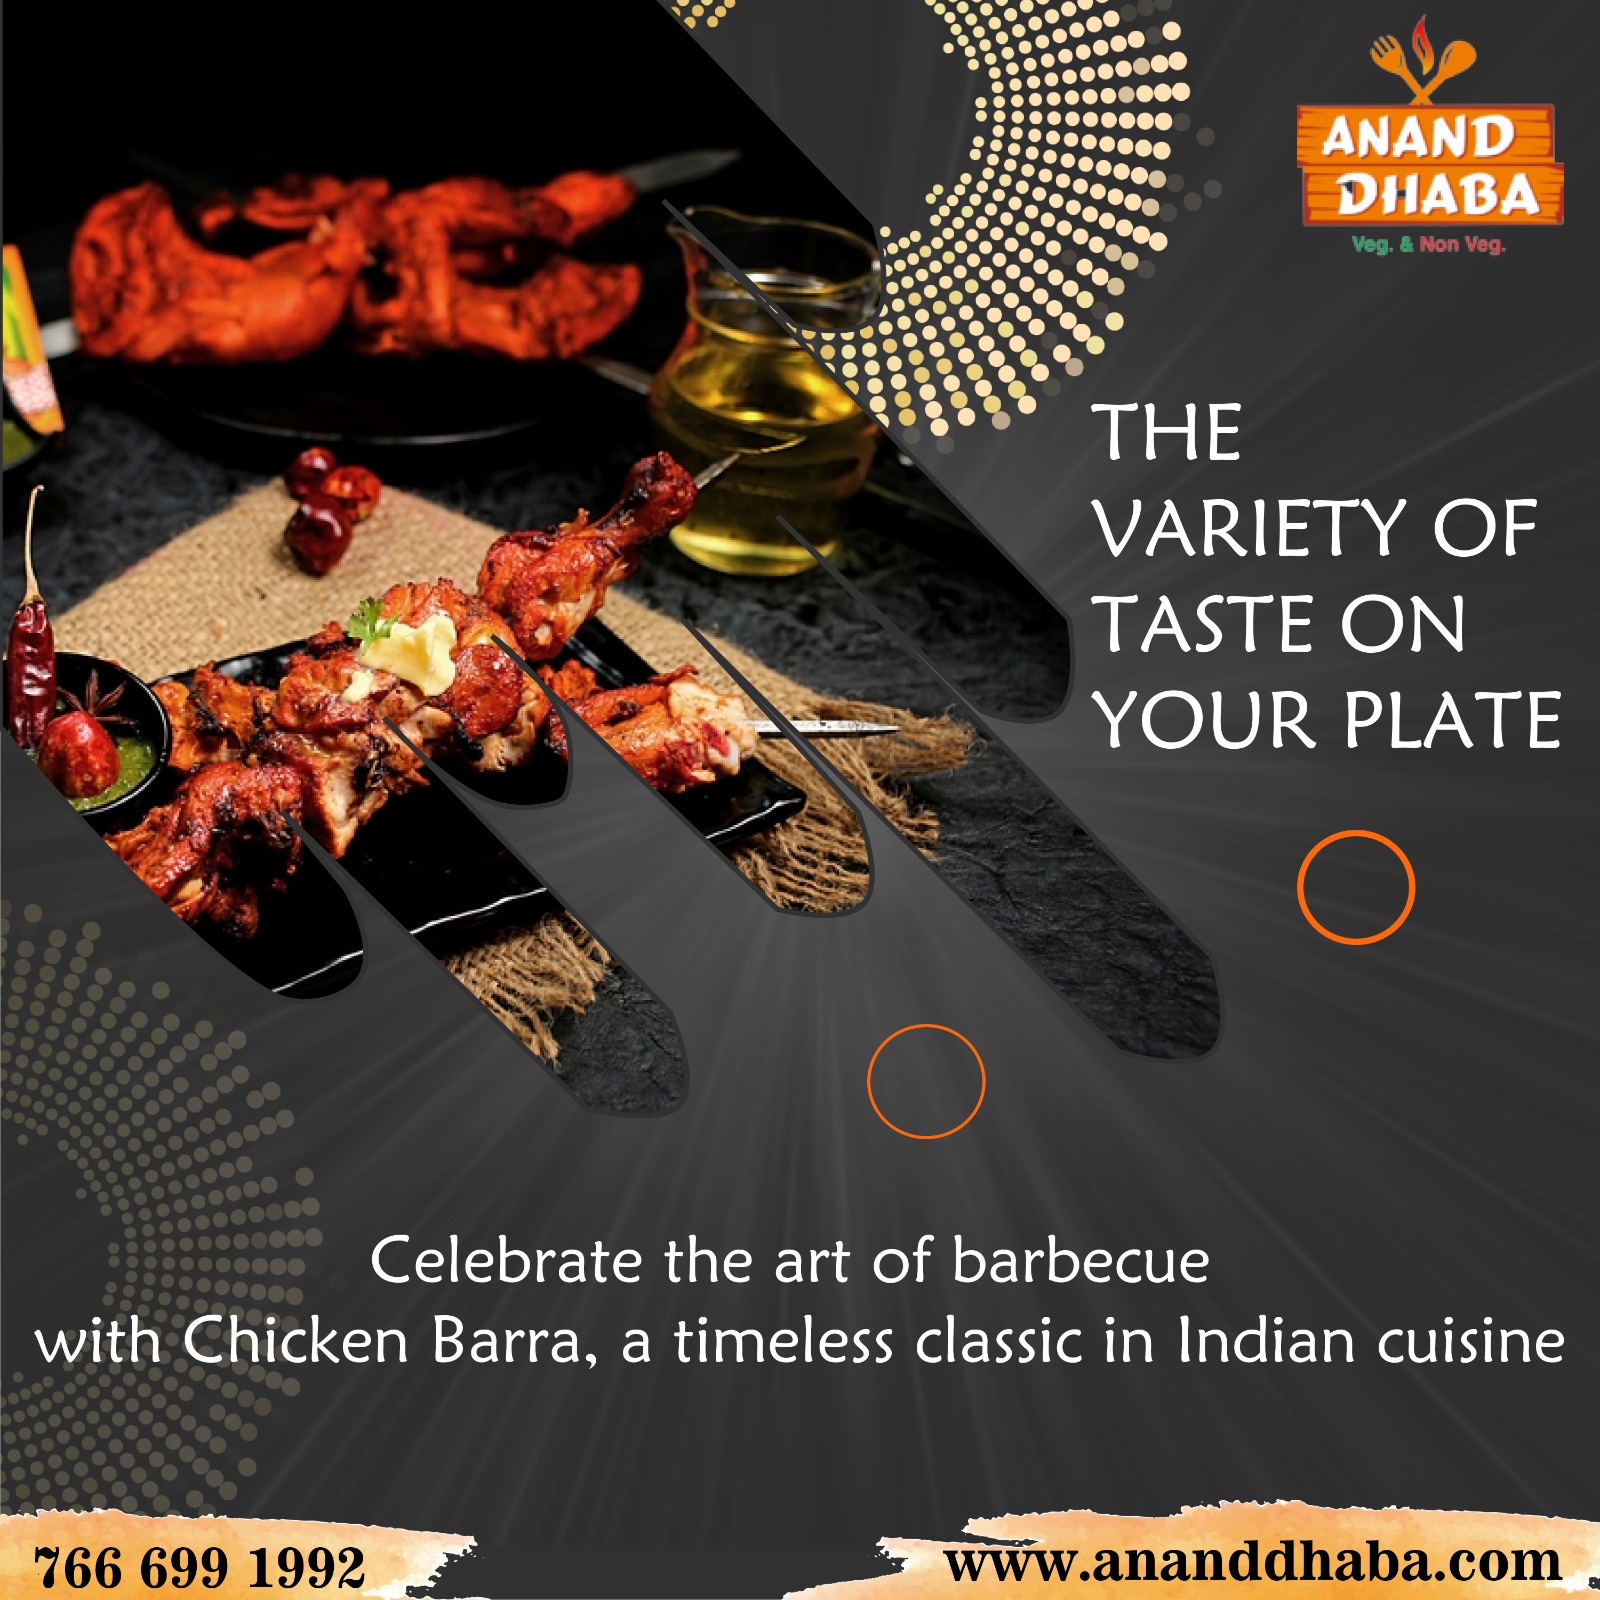 Celebrate the Art of Barbecue at Anand Dhaba!